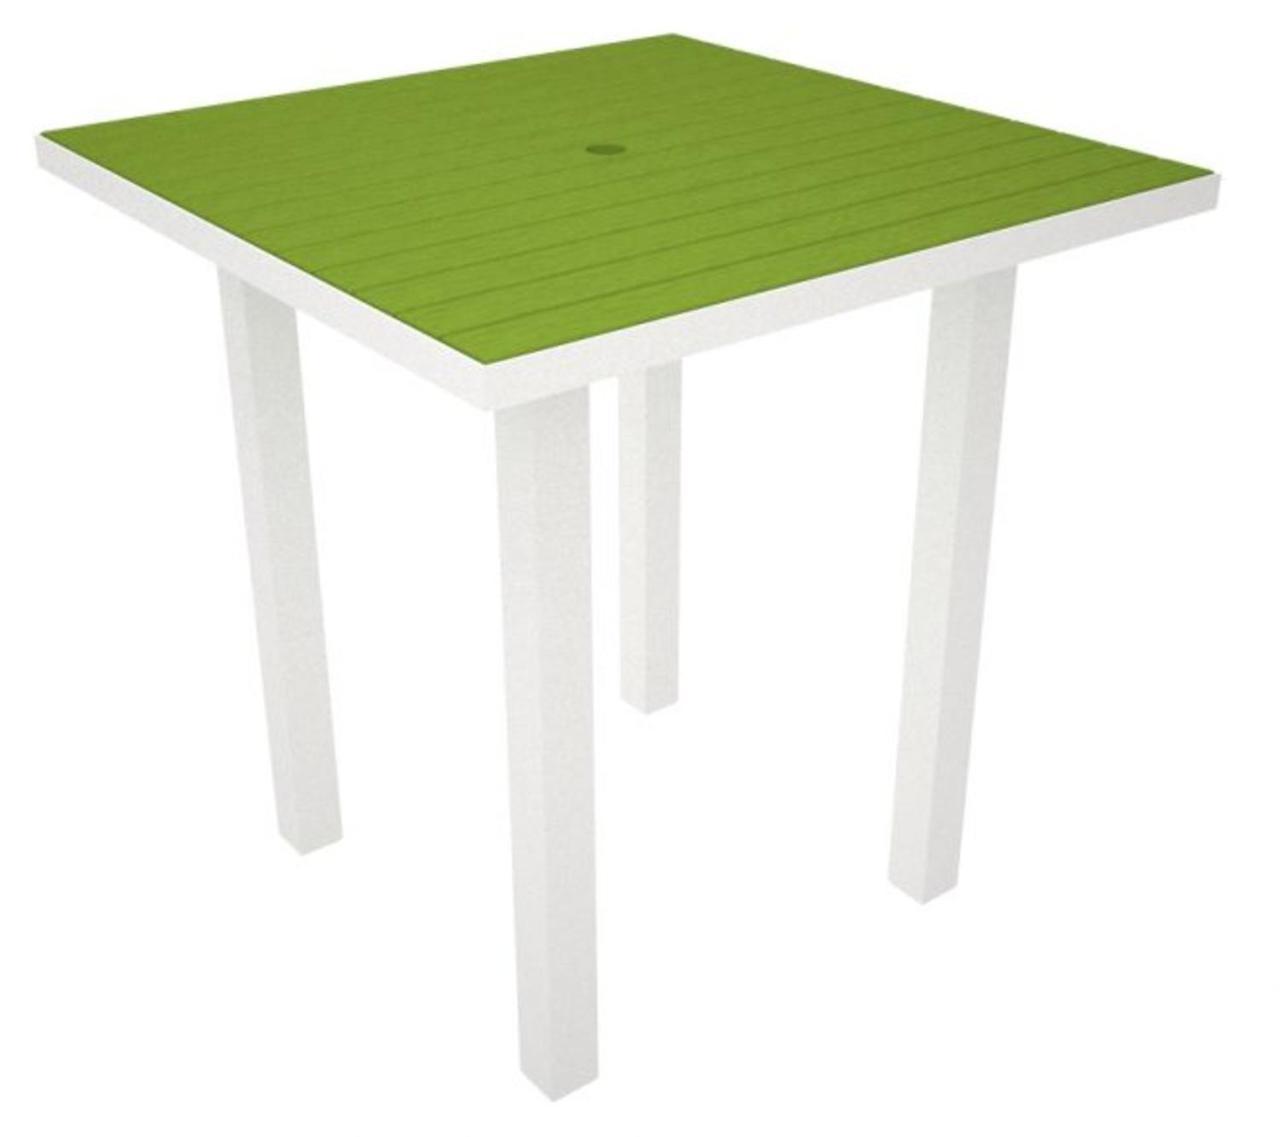 Green & White Recycled Earth-Friendly Patio Counter Table